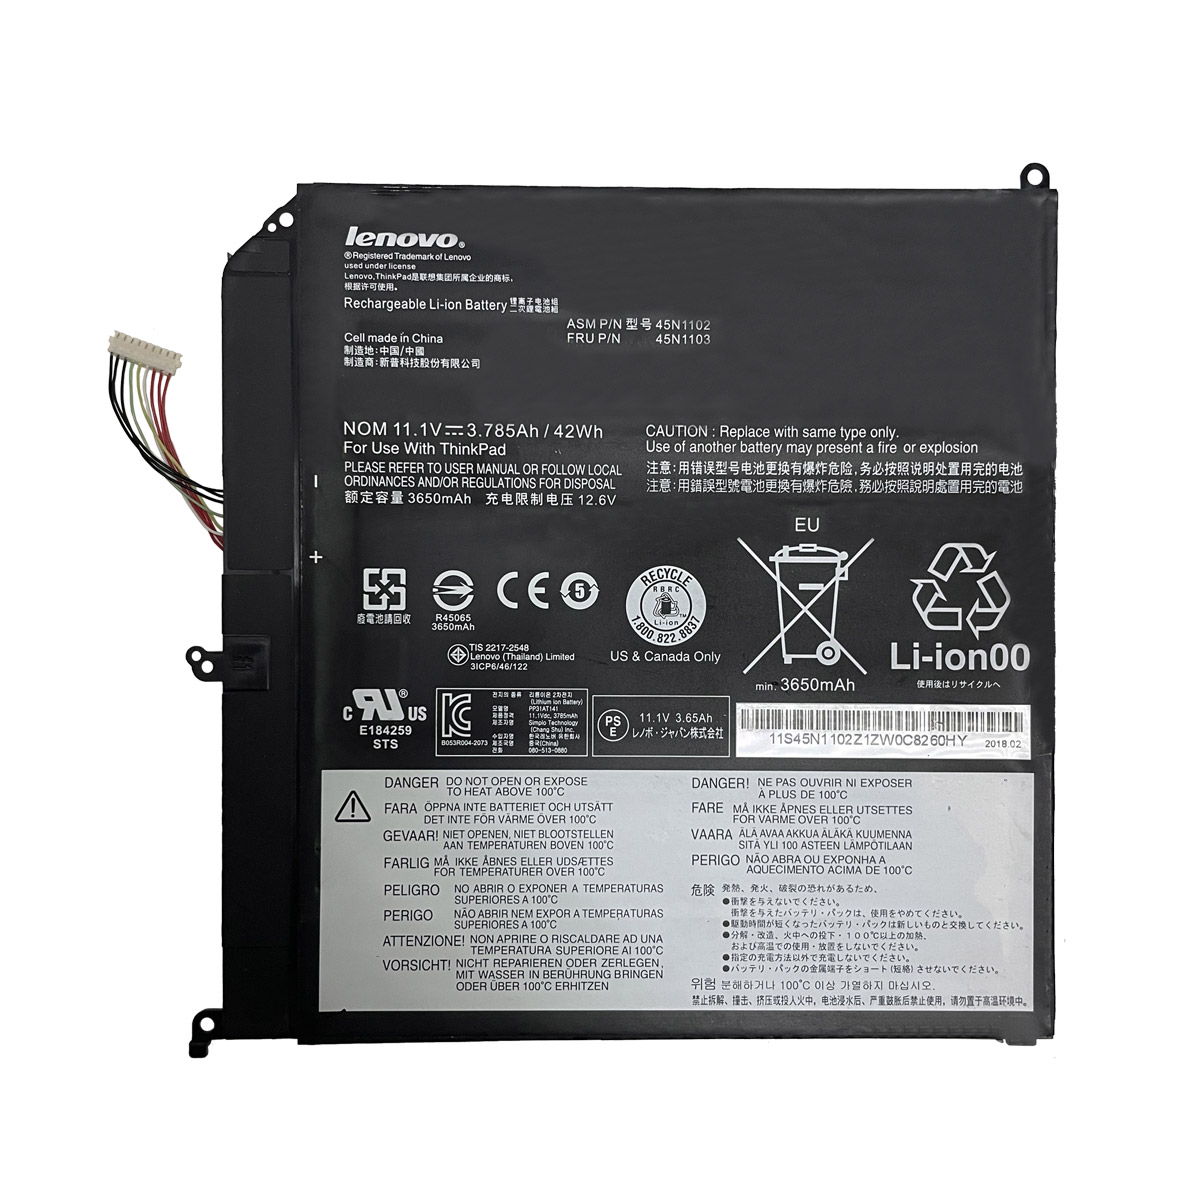 LENOVO-X1 Helix/45N1102-Laptop Replacement Battery